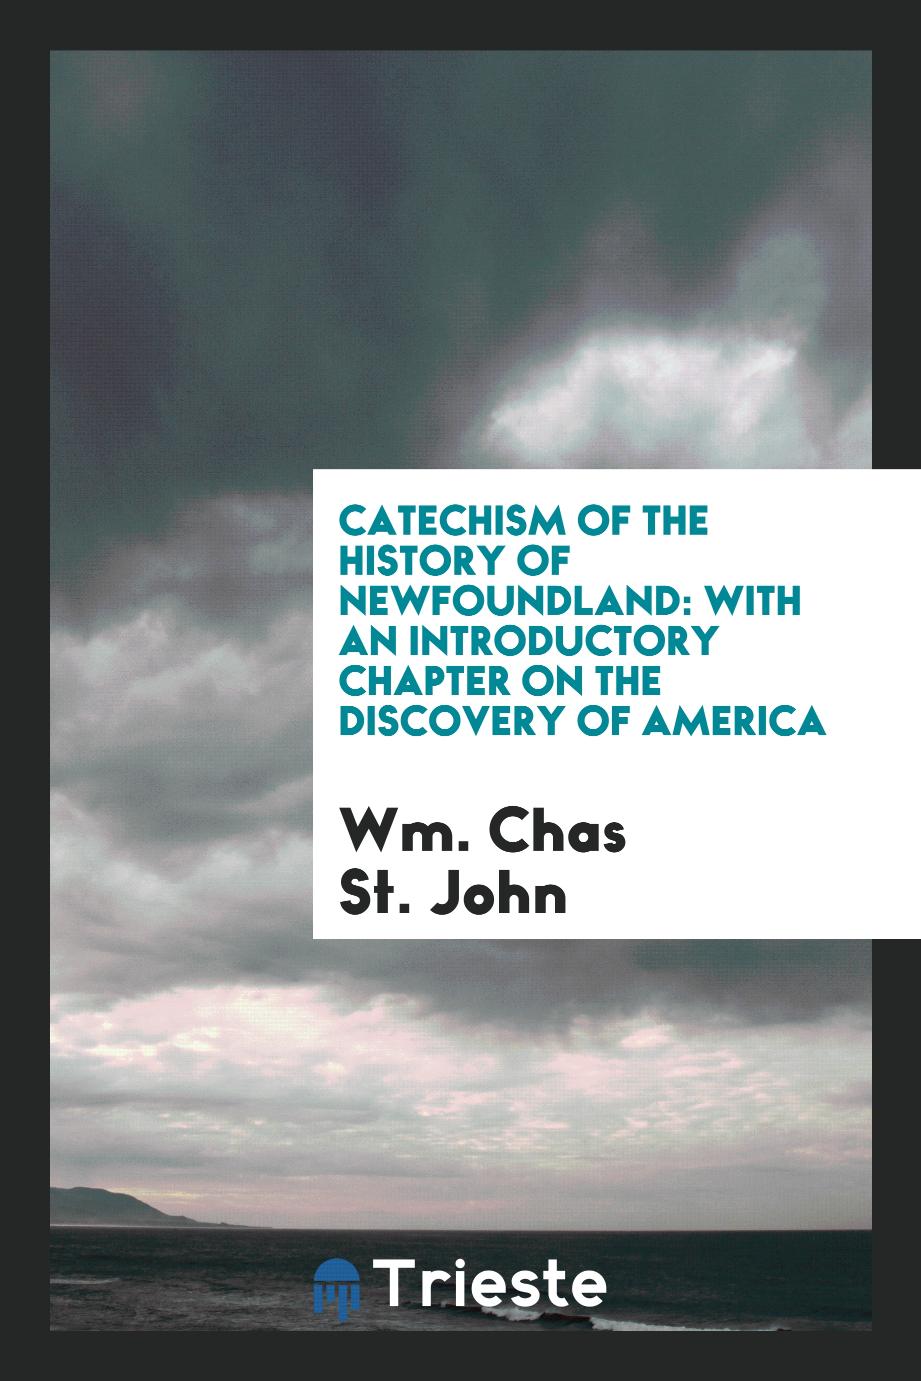 Catechism of the History of Newfoundland: With an Introductory Chapter on the Discovery of America